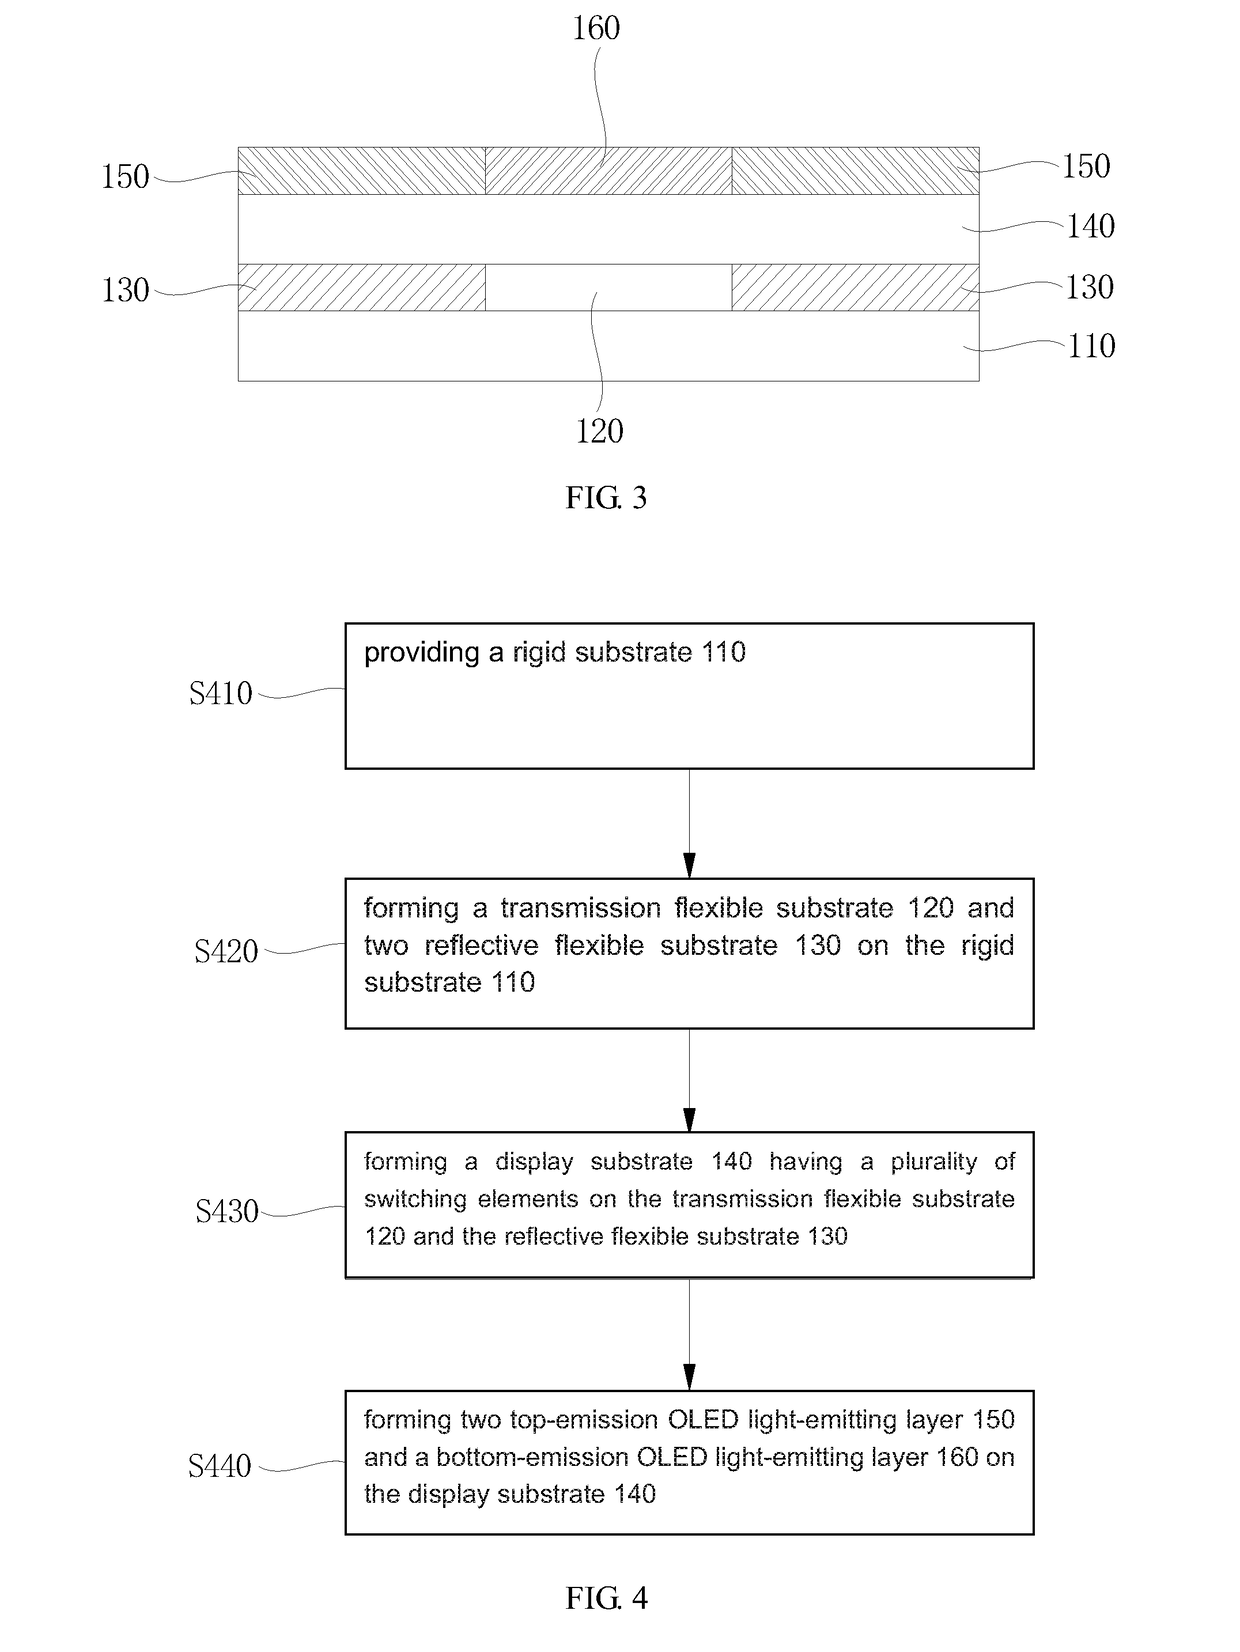 Double sided organic light-emitting display apparatus and its manufacturing method thereof